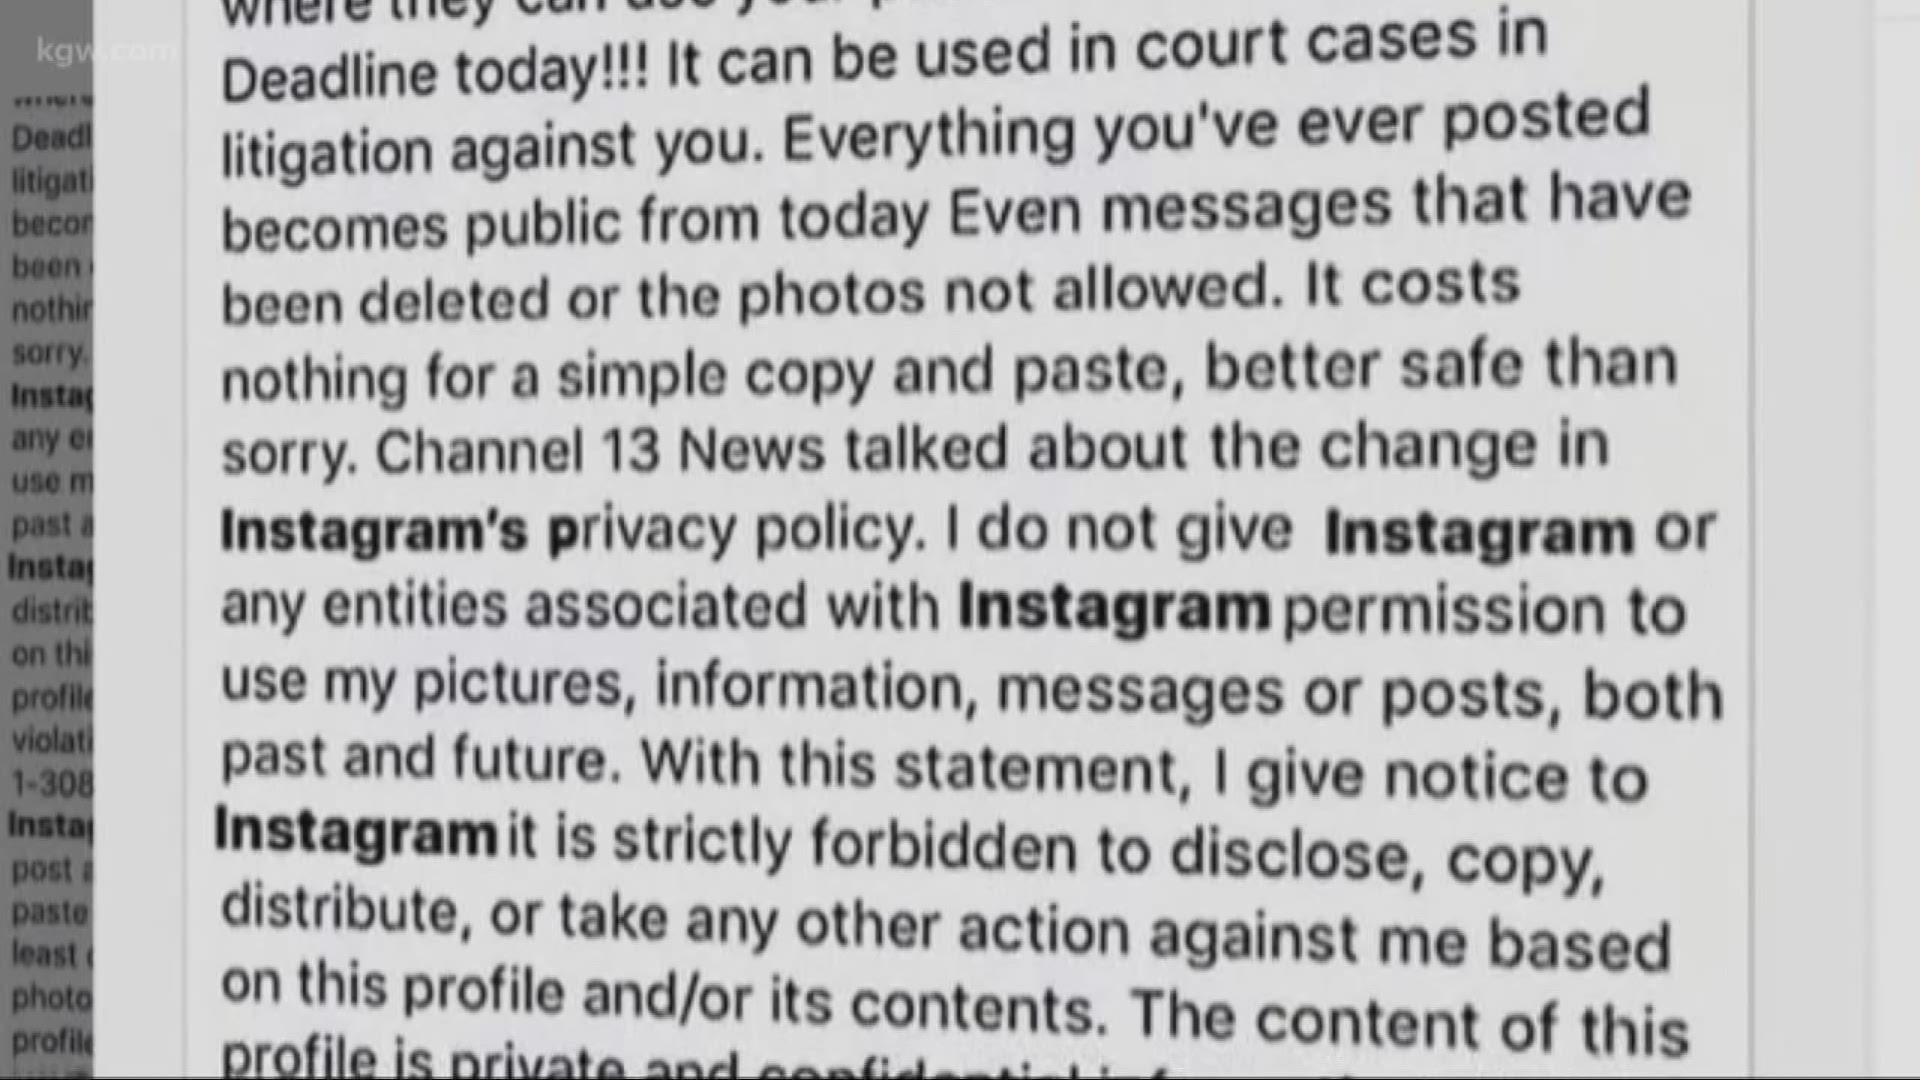 A years-old hoax is making the rounds on Instagram again, claiming the social media company is about to change its rules in order to access users’ photos. KGW’s Cristin Severance is here to Verify whether this is real or not.